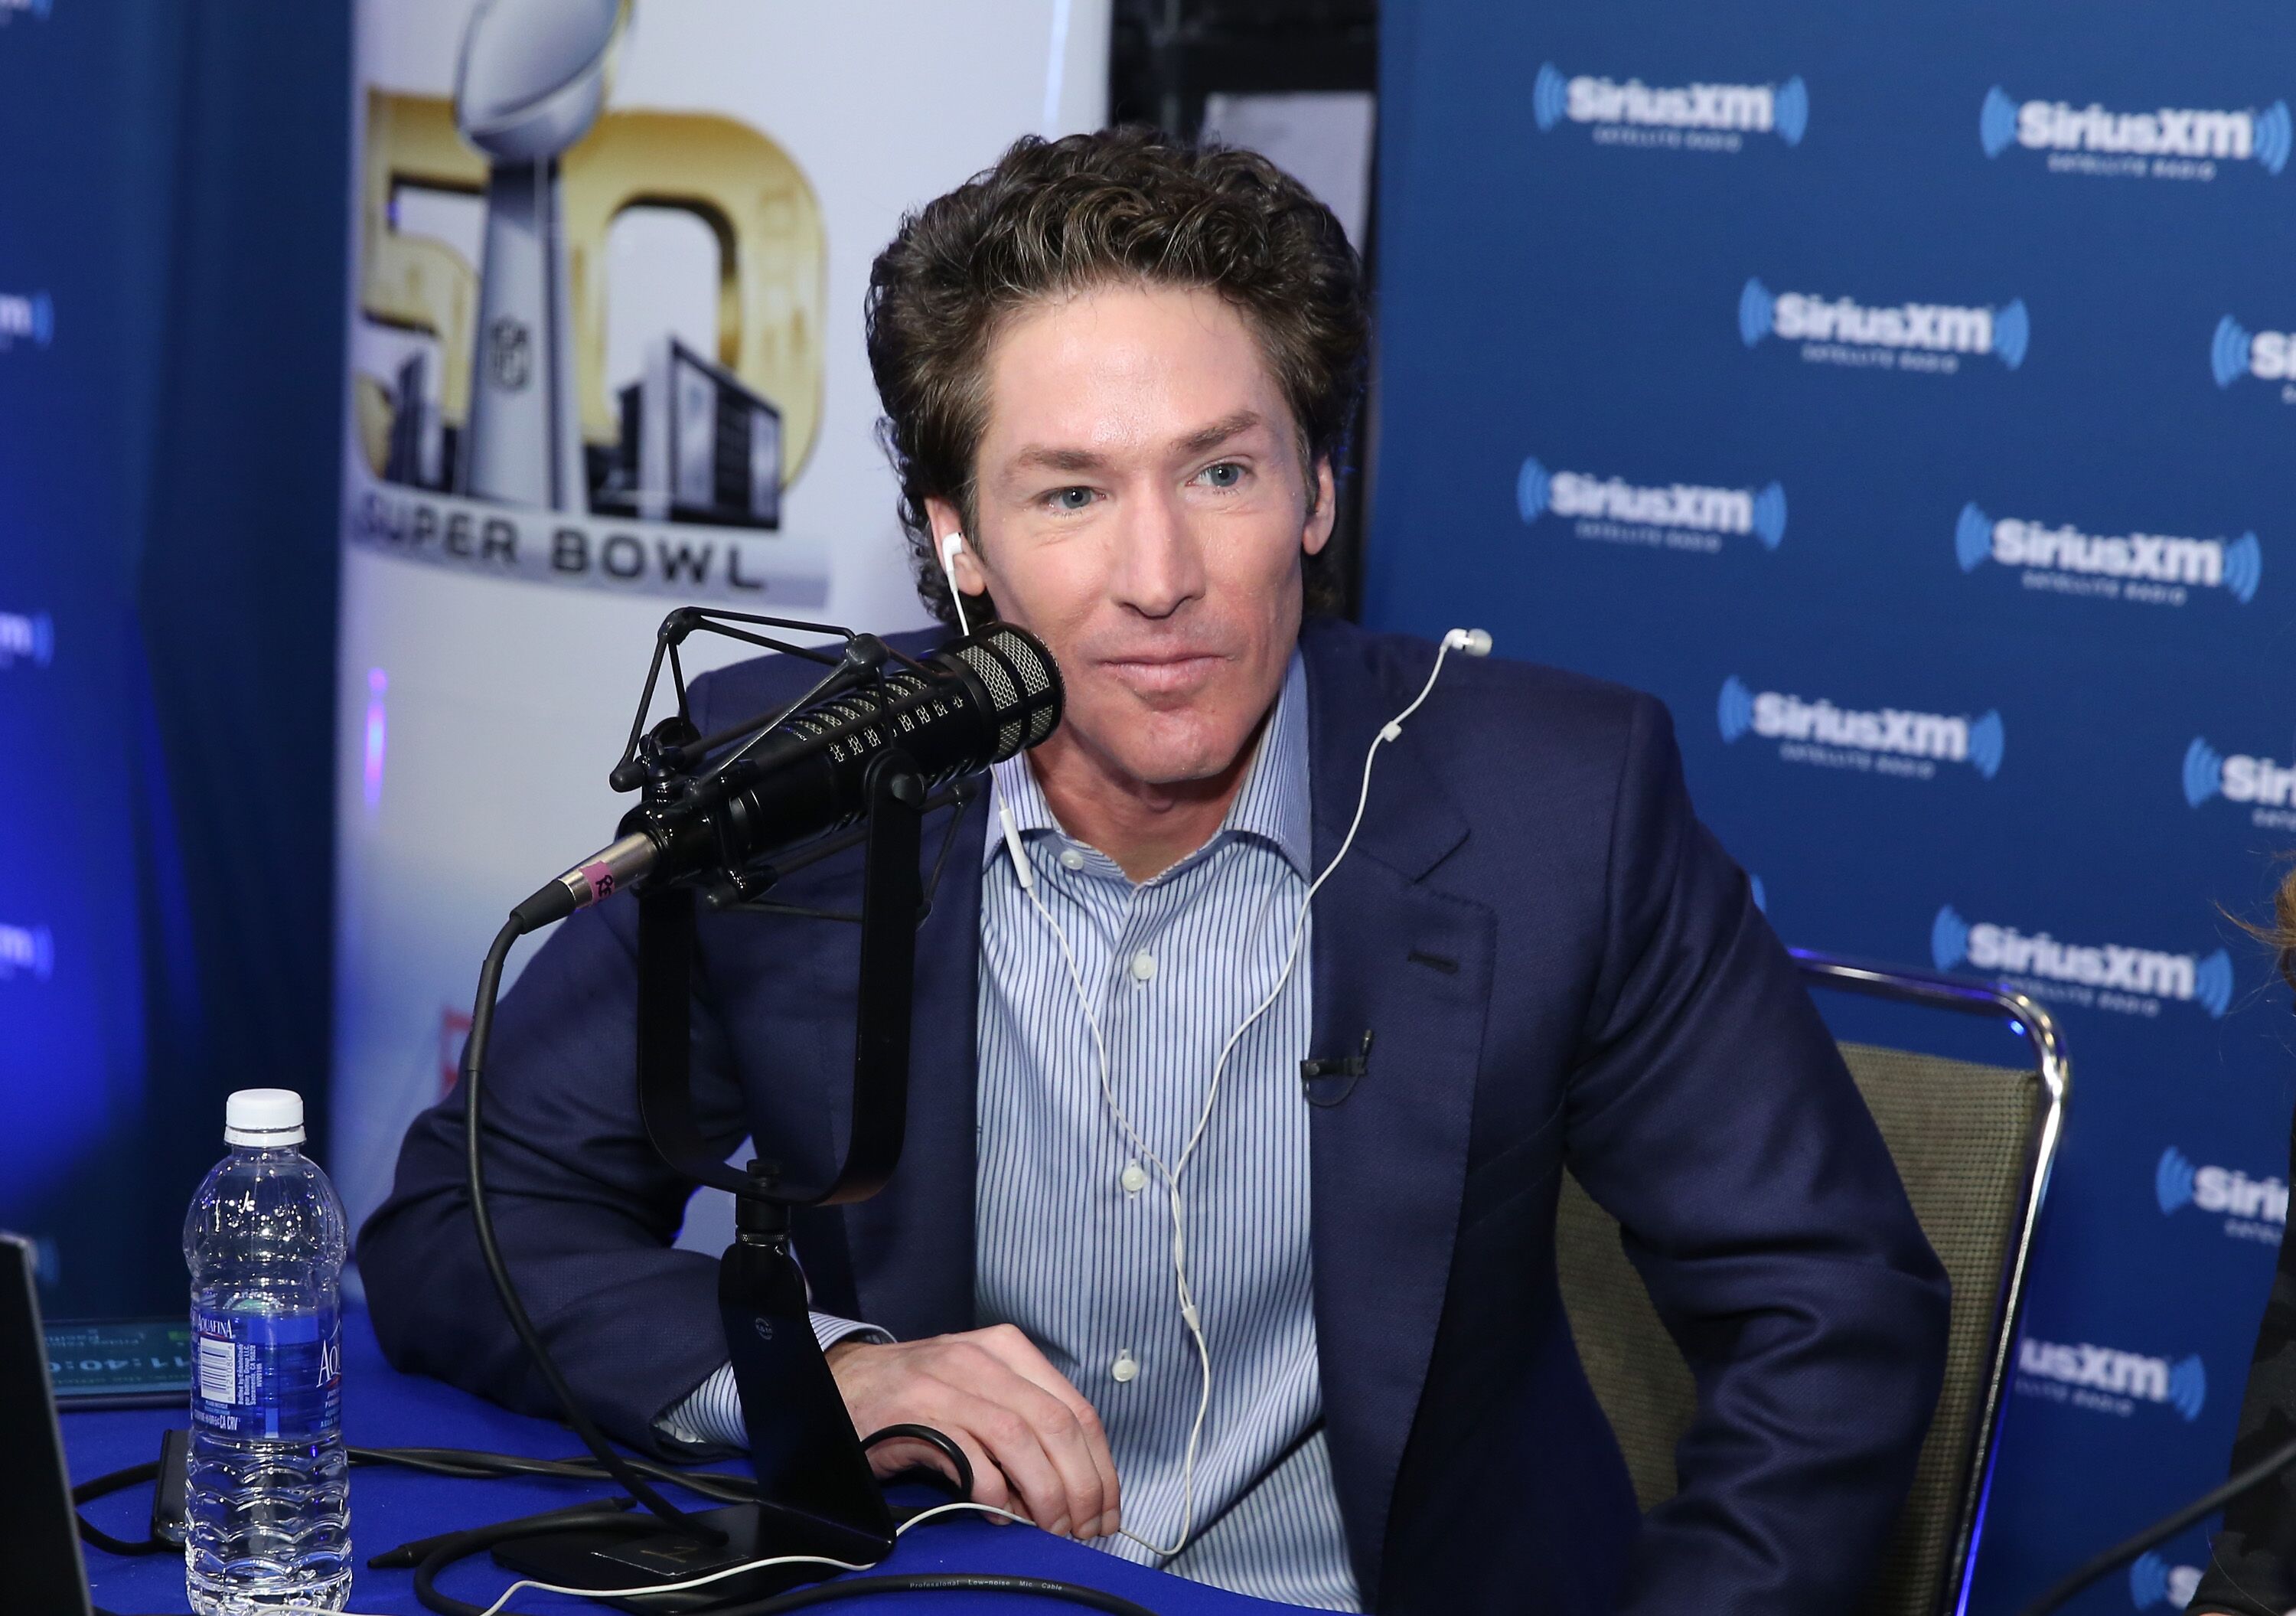 Pastor Joel Osteen at the SiriusXM set on February 5, 2016, in San Francisco, California | Photo: Cindy Ord/Getty Images